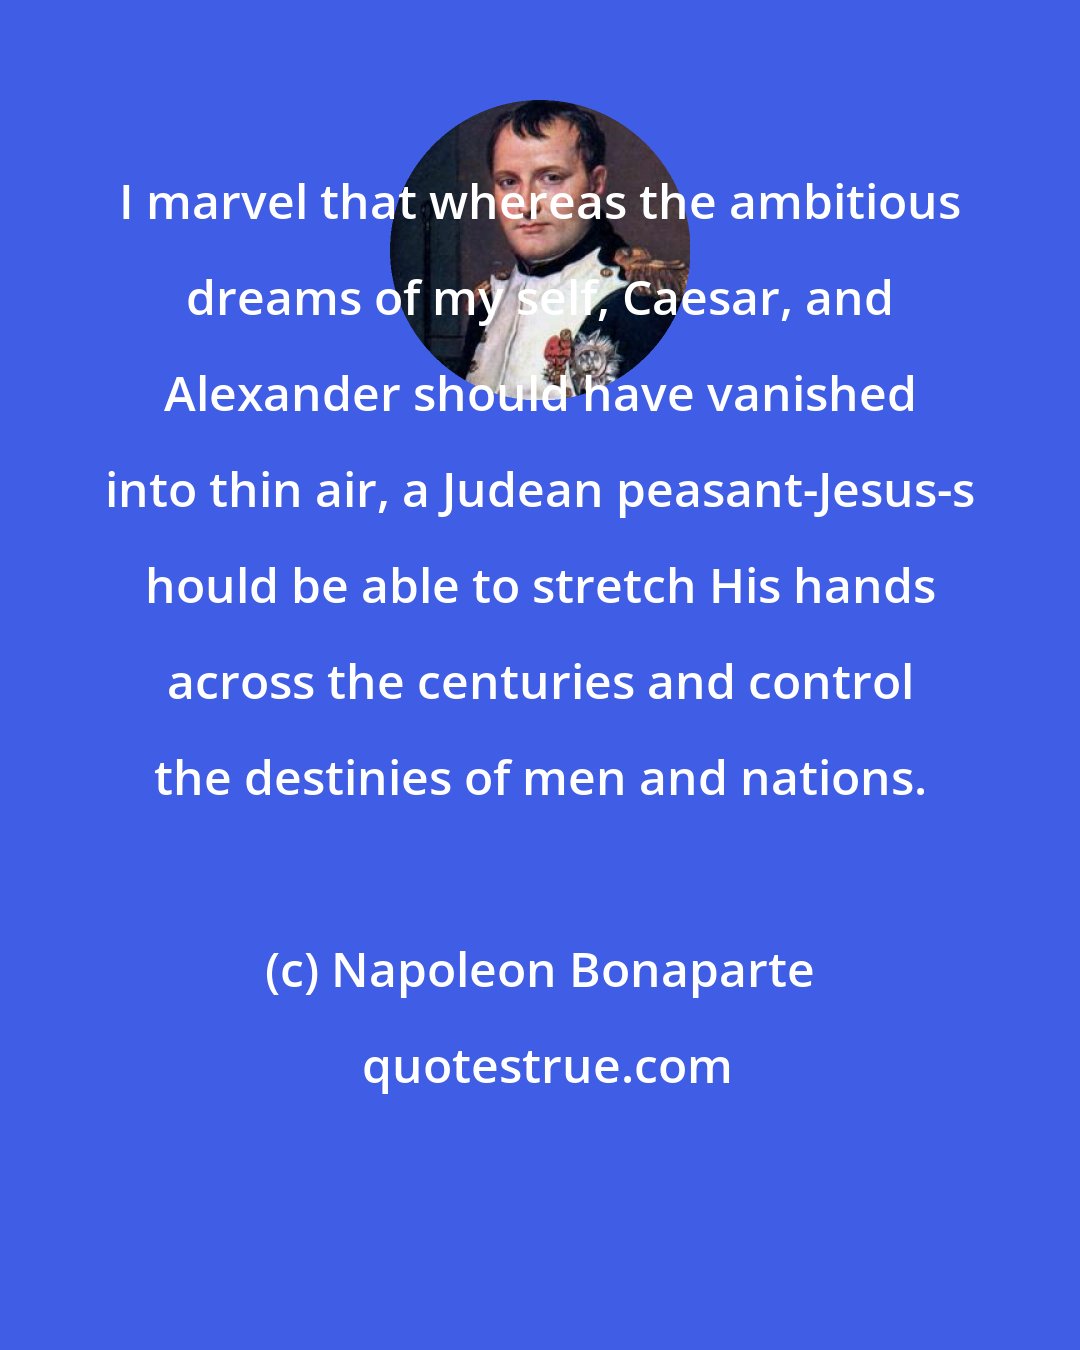 Napoleon Bonaparte: I marvel that whereas the ambitious dreams of my self, Caesar, and Alexander should have vanished into thin air, a Judean peasant-Jesus-s hould be able to stretch His hands across the centuries and control the destinies of men and nations.